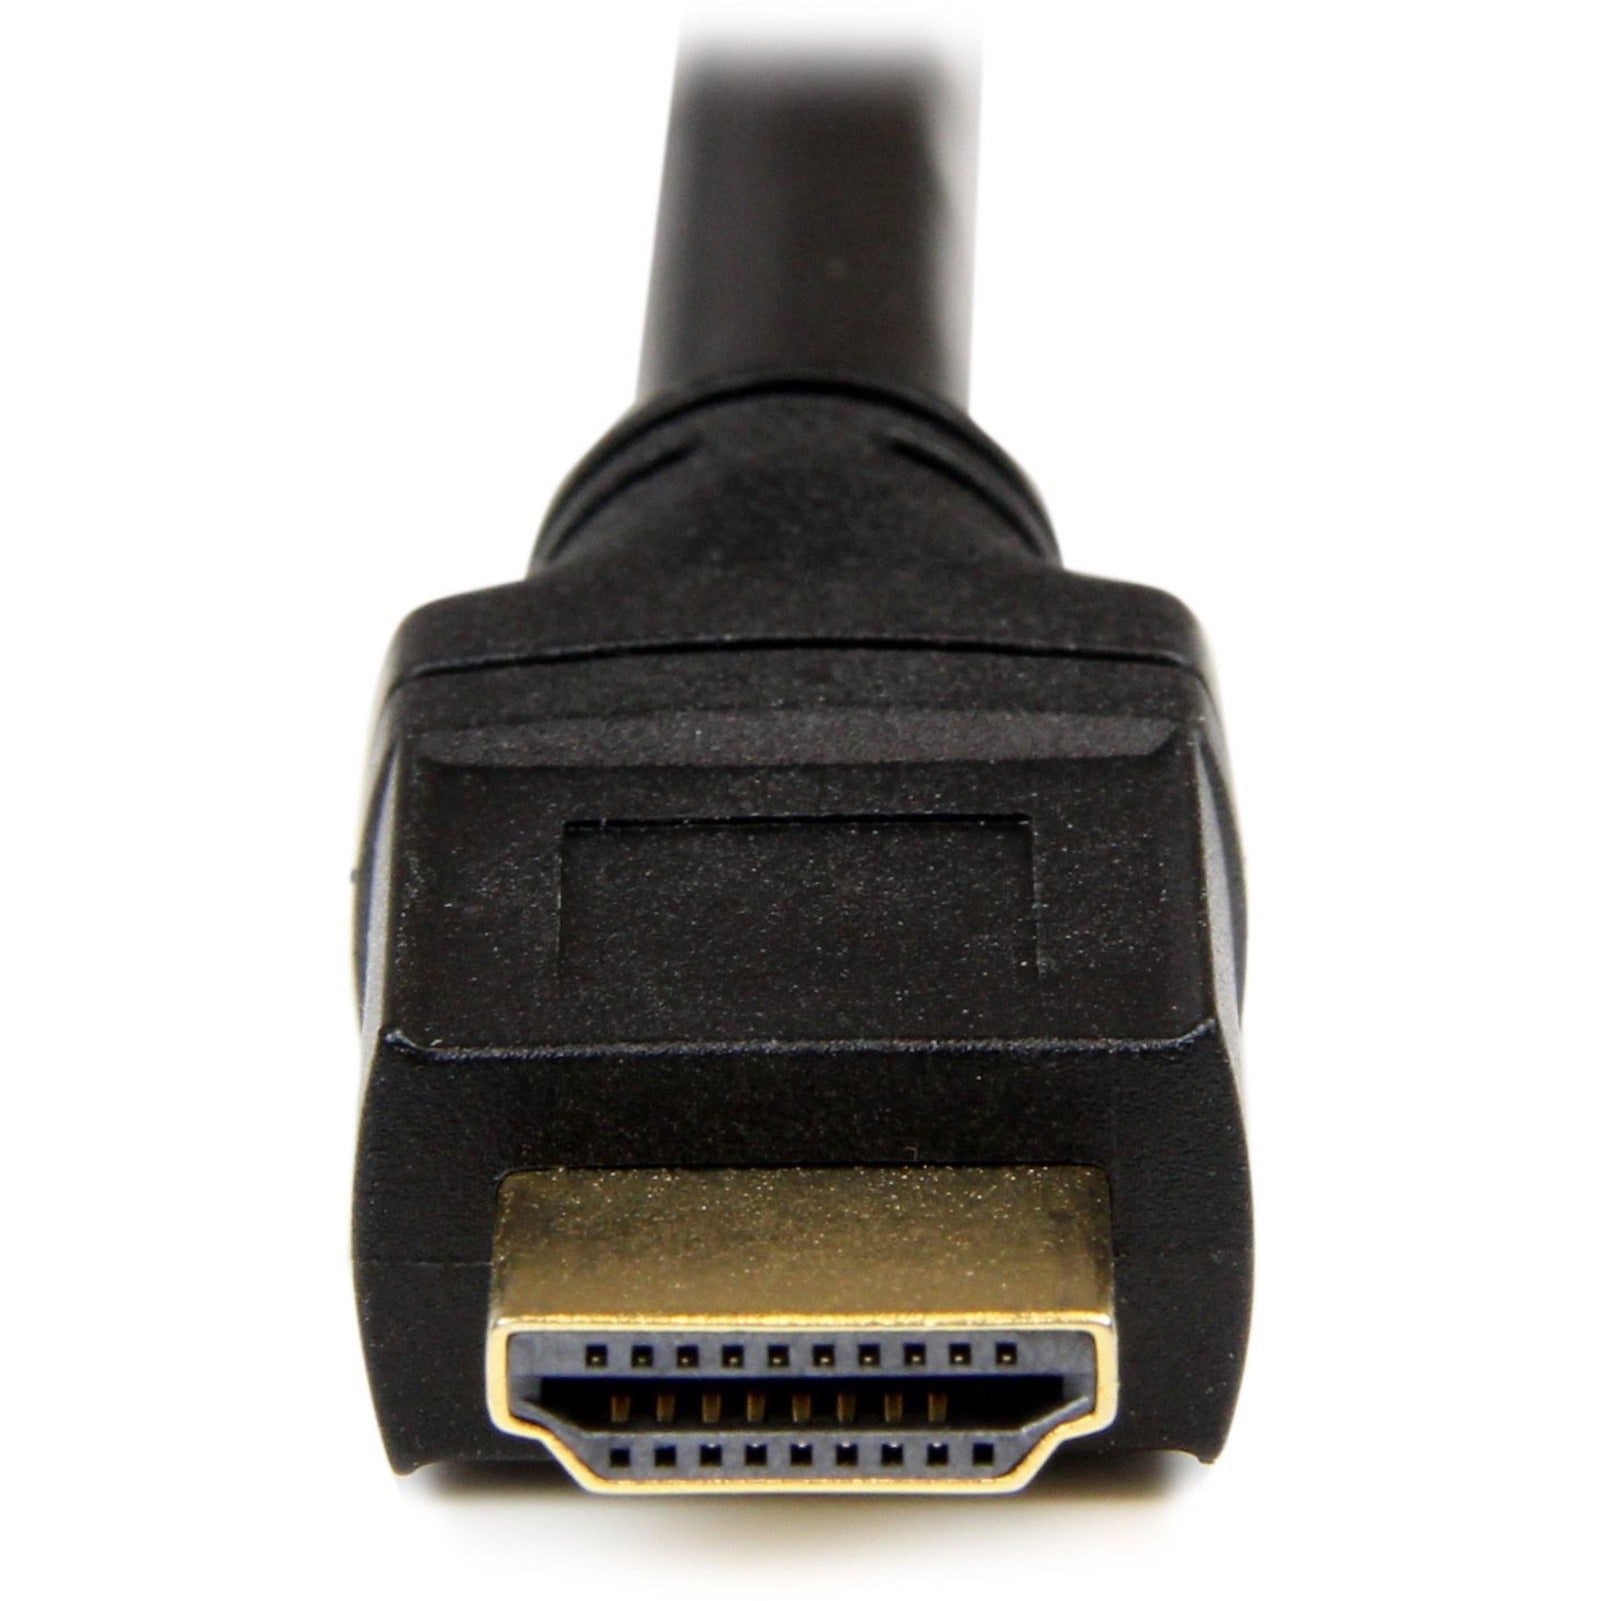 StarTech.com HDPMM25 25 ft 7m Plenum-Rated High Speed HDMI Cable - HDMI to HDMI - M/M, 10.2 Gbit/s Data Transfer Rate, 4096 x 2160 Supported Resolution